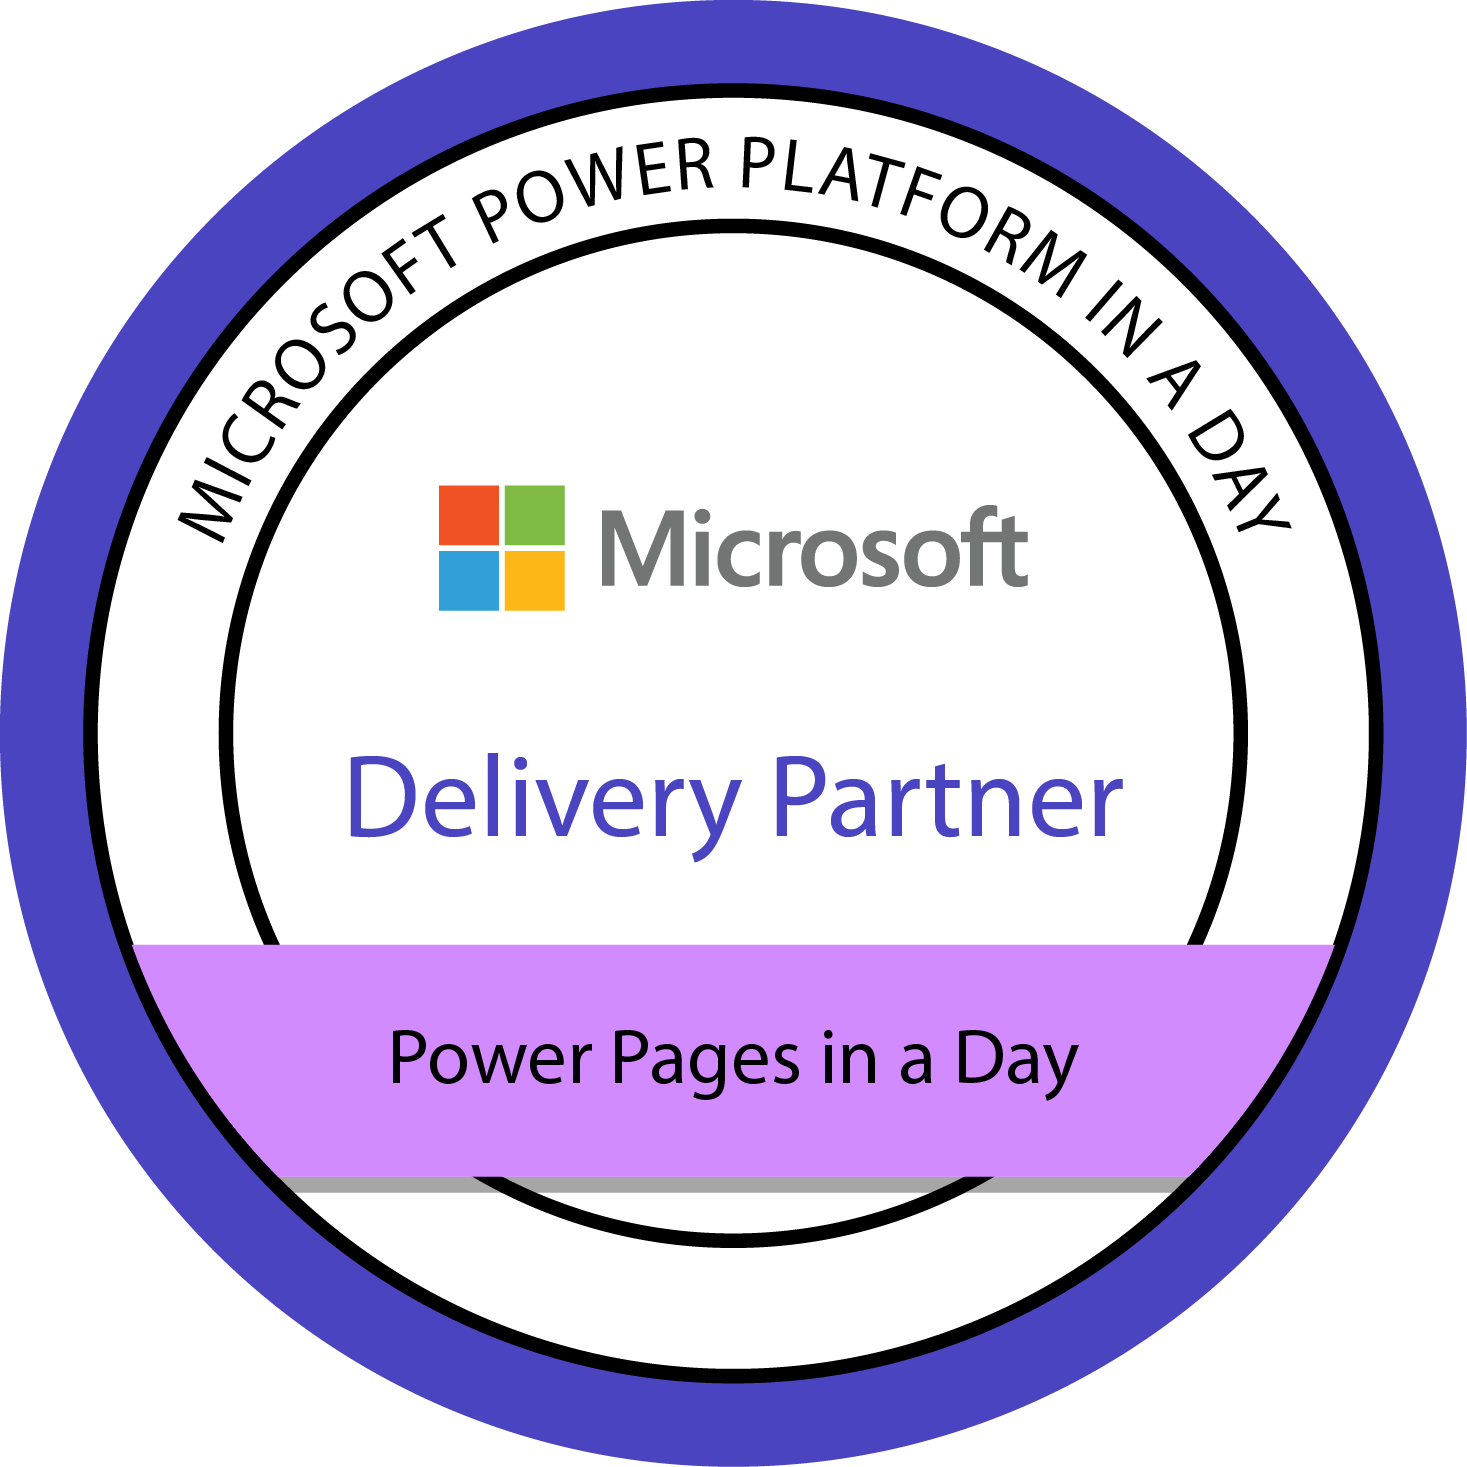 Power Page in a Day